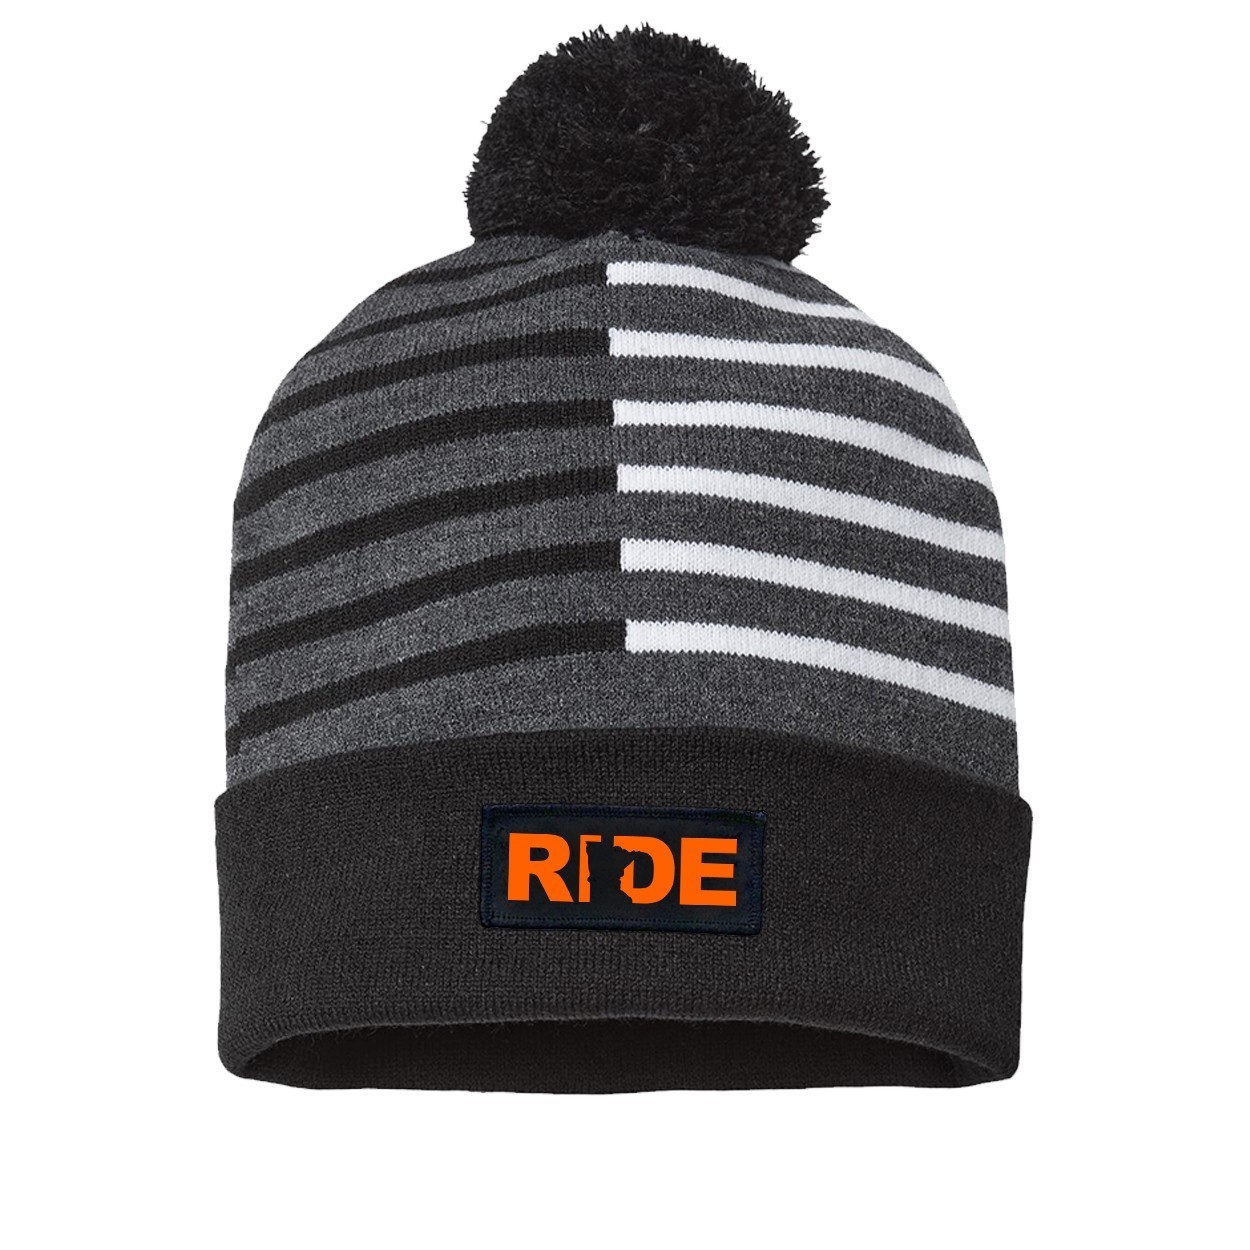 Ride Minnesota Night Out Woven Patch Roll Up Pom Knit Beanie Half Color Black/White (Orange Logo)